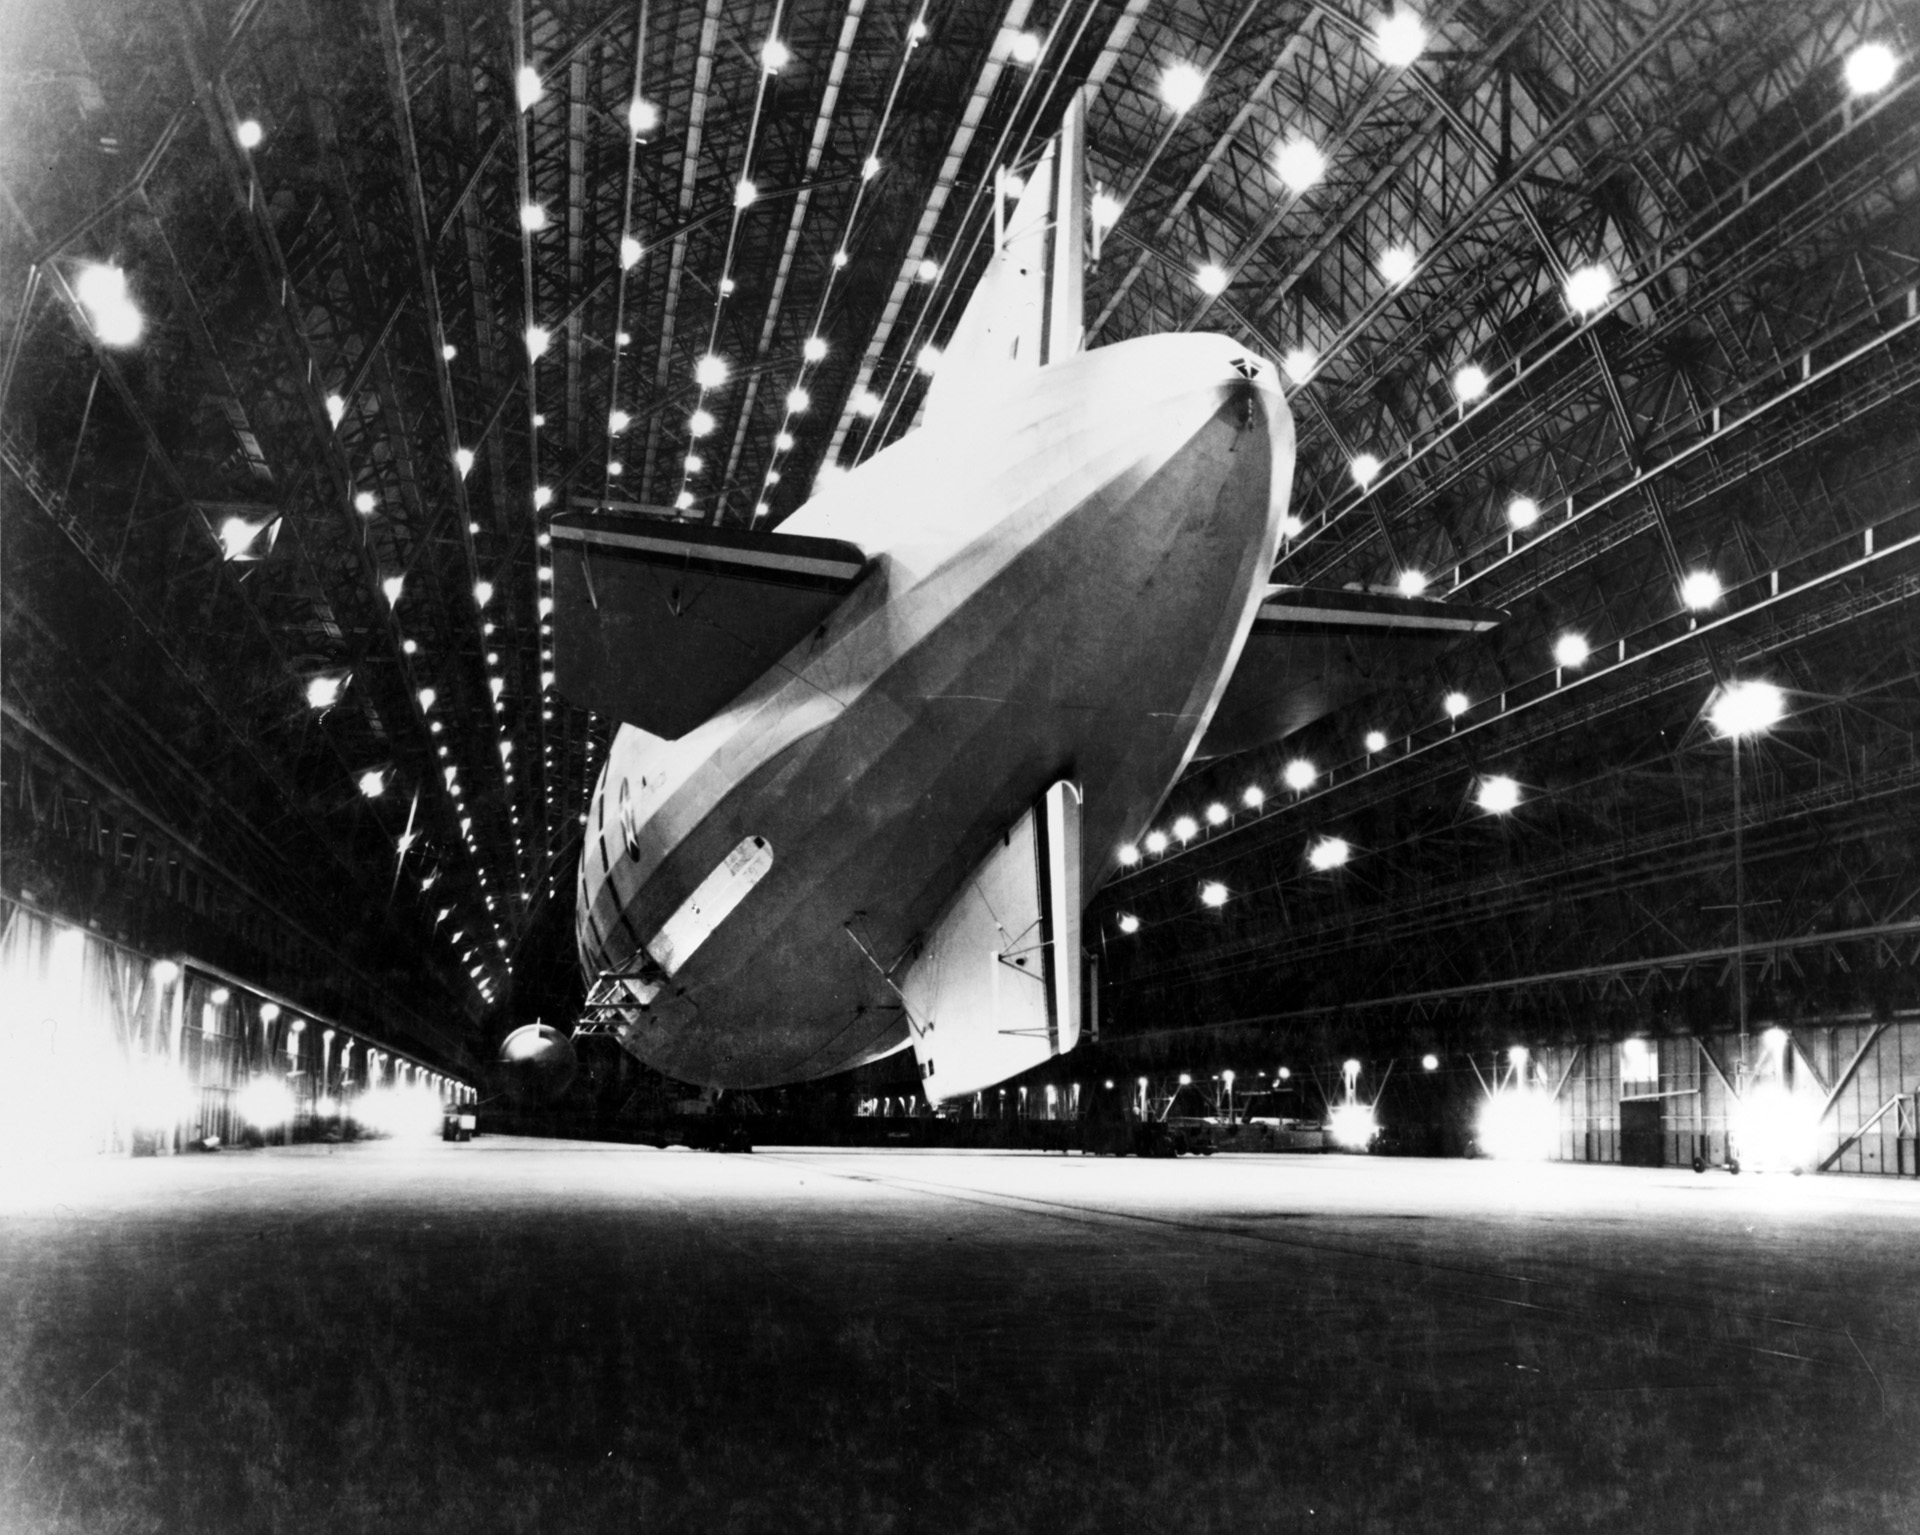 The immense airship USS Macon is shown docked in its hangar at Naval Air Station Moffet Field, Sunnyvale, California, in October 1933.  This photo was taken following a cross-country flight from Lakehurst, New Jersey, and months before the airship was damaged during a storm and lost off the coast of Big Sur, California, in 1935. Most fo the crew was rescued, and the wreckage is listed as the USS Macon Airship Remains on the U.S. National Register of Historic Places.